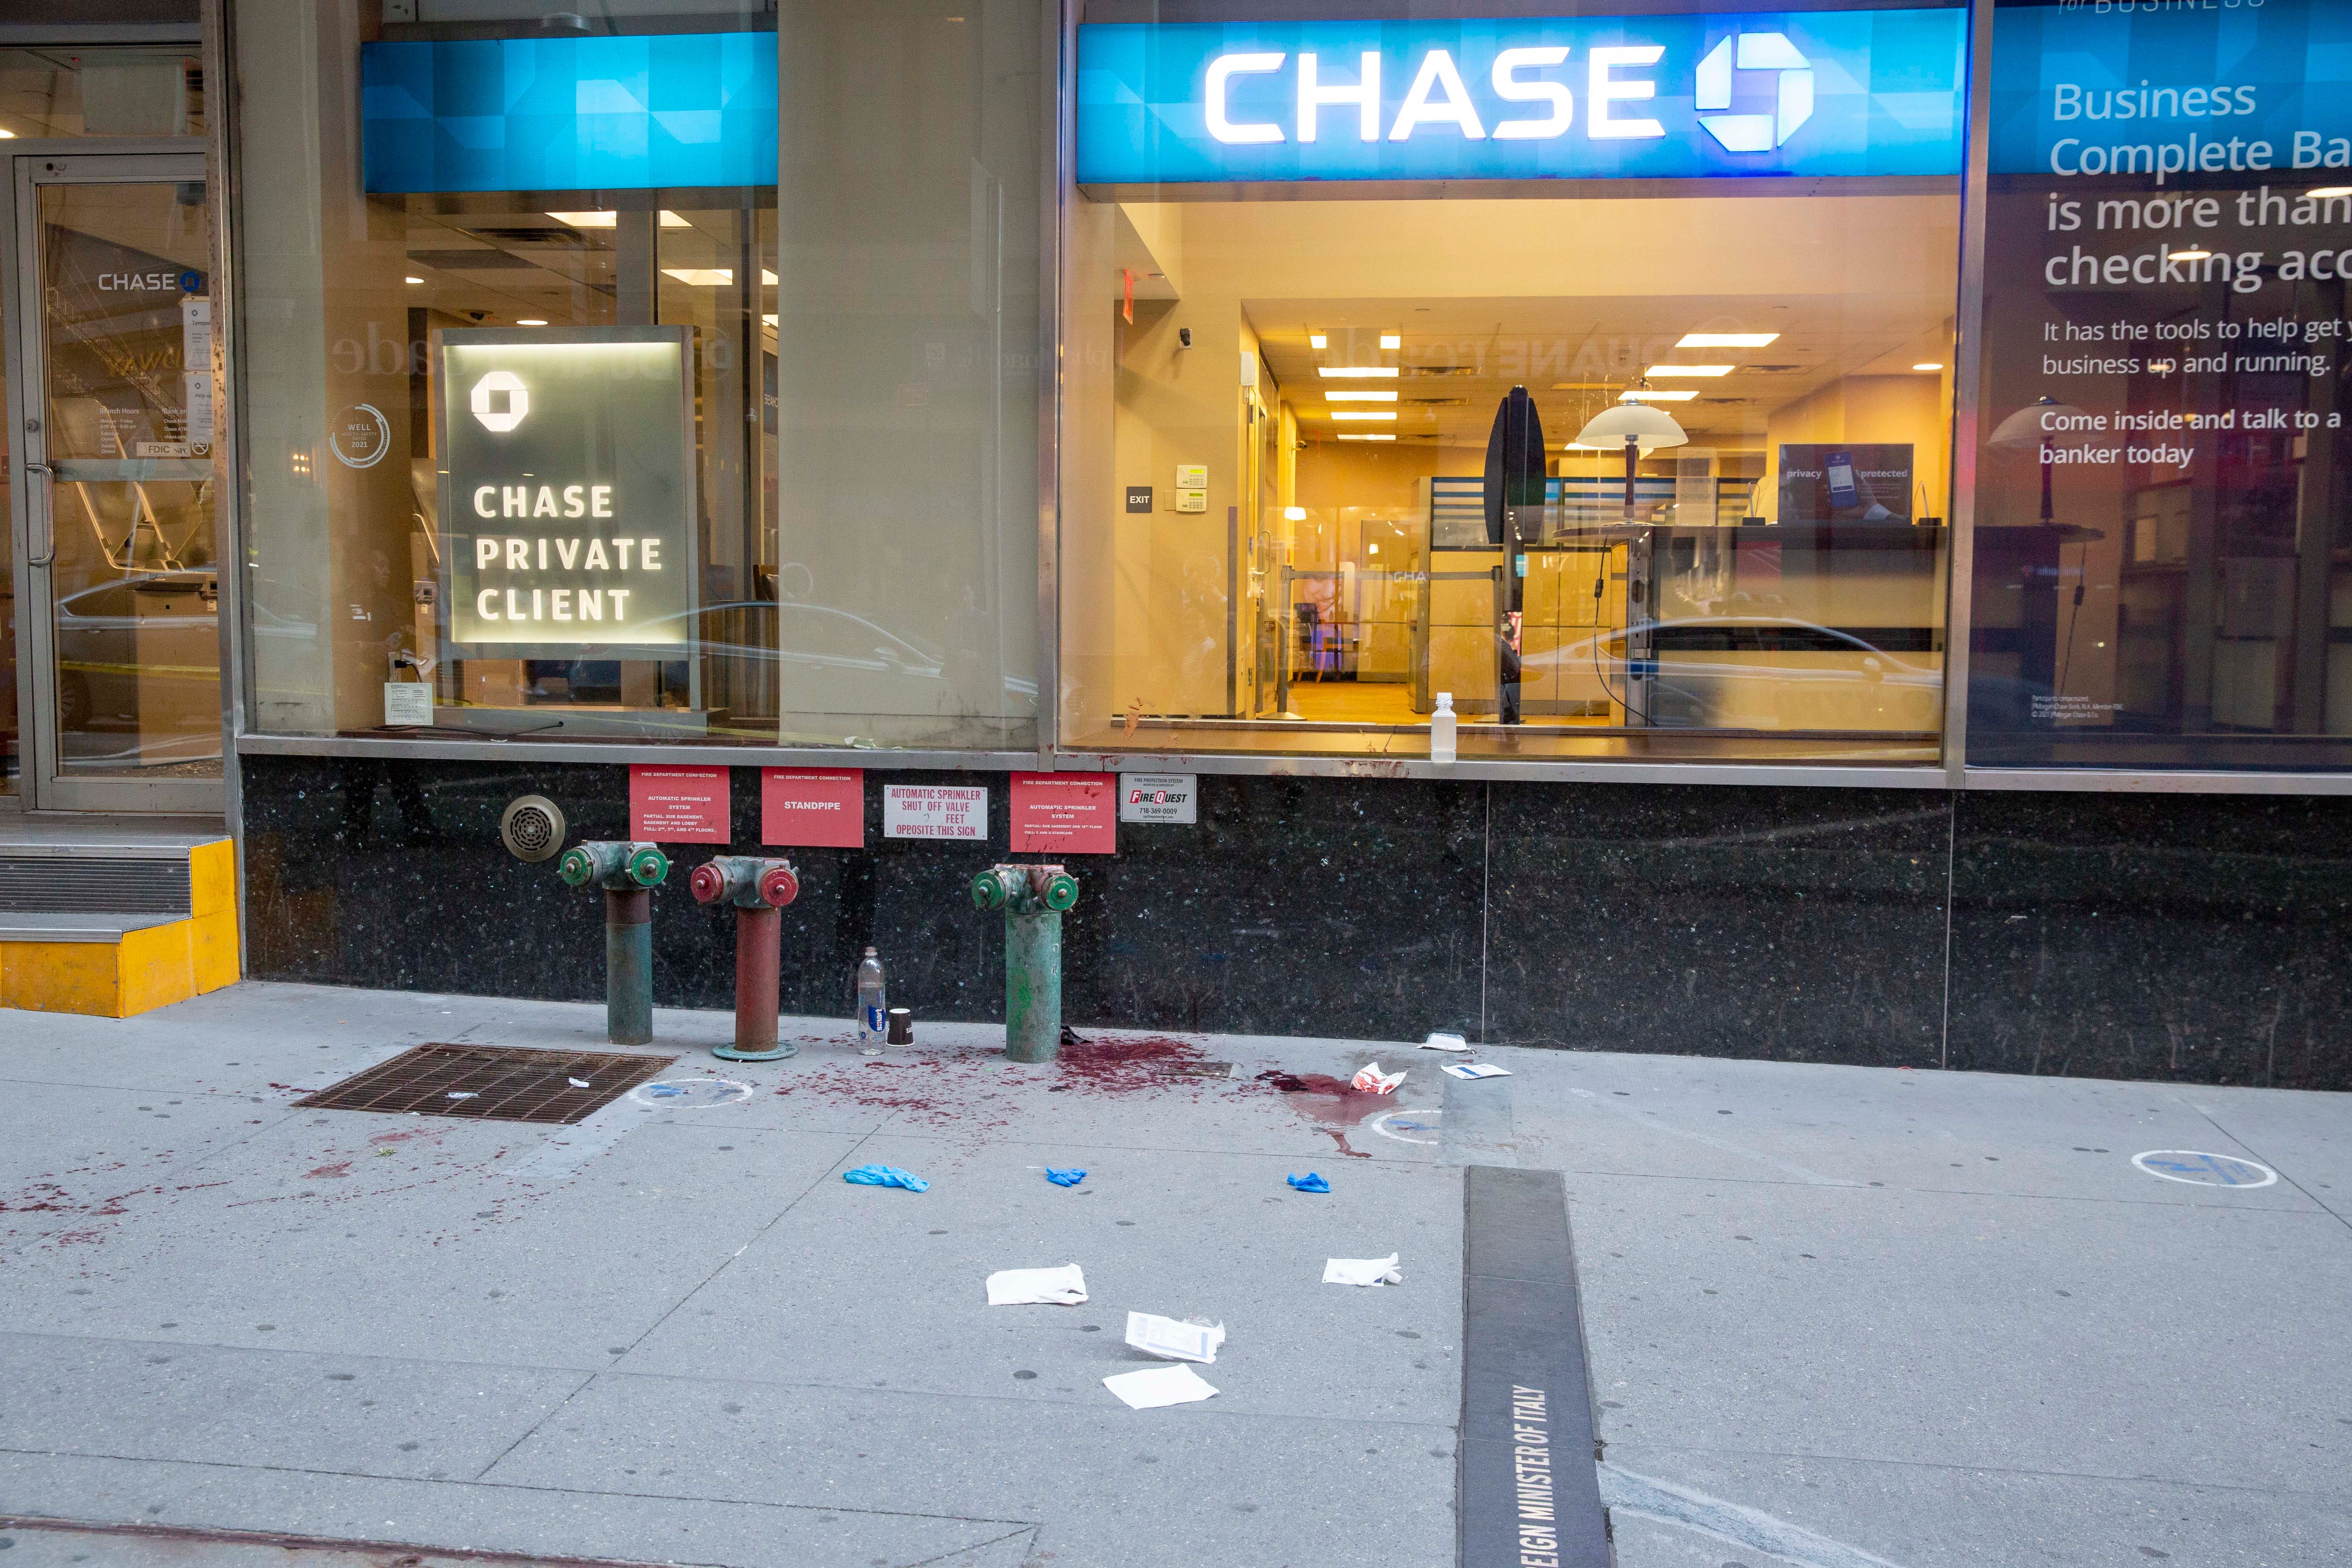 NYC slashing: man brutally attacked by hatchet-wielding maniac at bank ATM